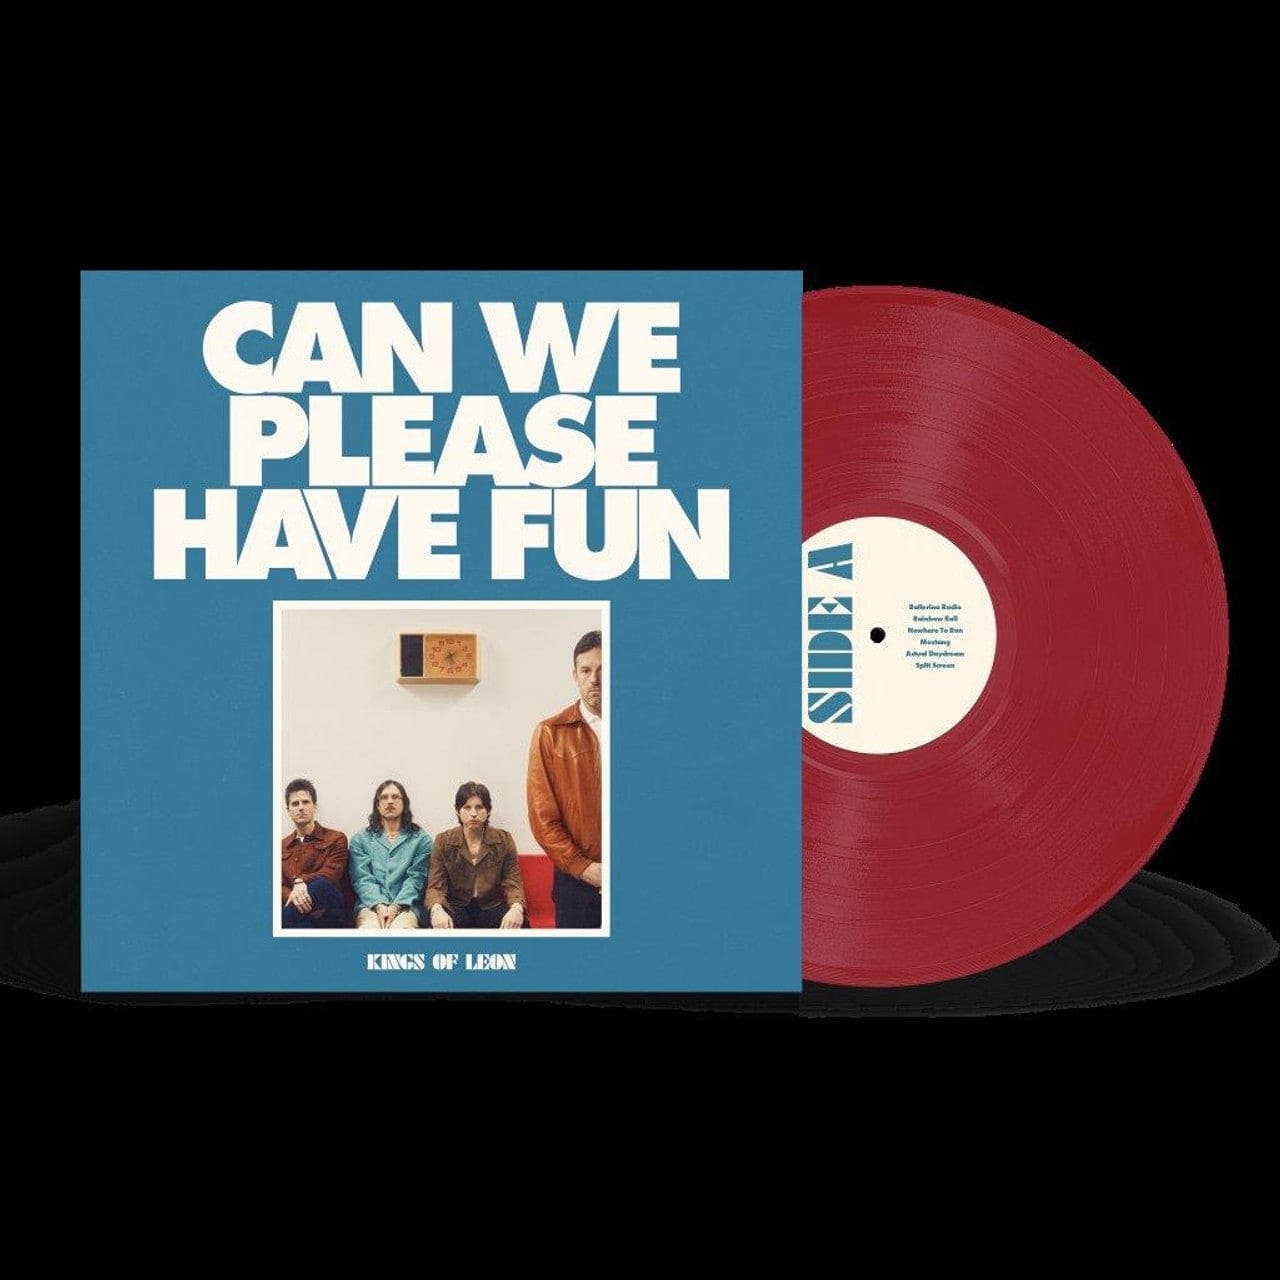 KINGS OF LEON - Can We Please Have Fun Vinyl